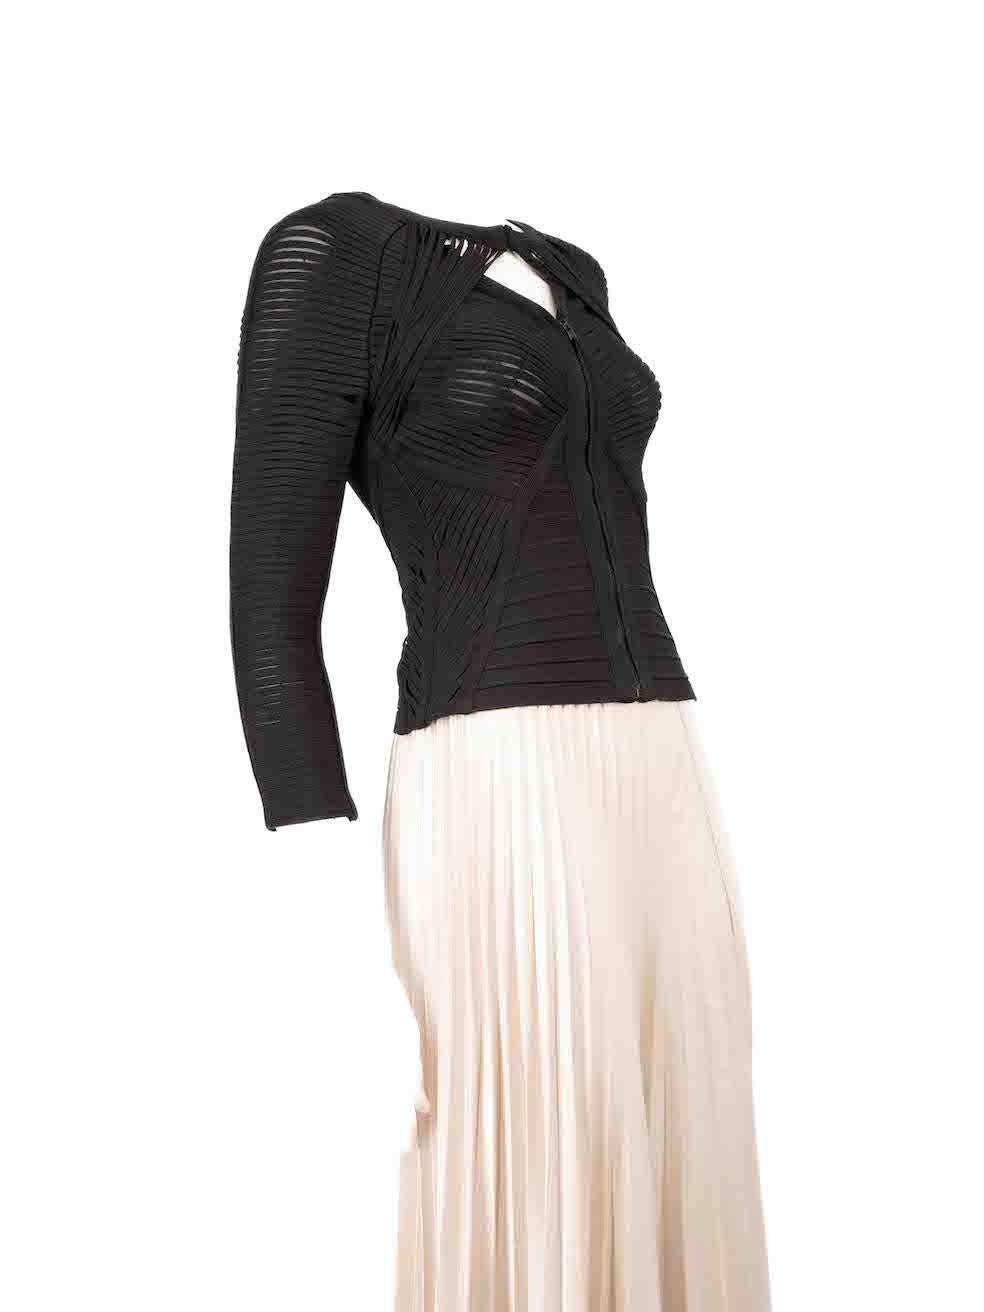 CONDITION is Very good. Minimal wear to top is evident. One seam of a strap is loosen on the rear of this used Herve Leger designer resale item.
 
 
 
 Details
 
 
 Black
 
 Rayon
 
 Top
 
 Long sleeves
 
 Strappy detail
 
 Round neck
 
 Front hook